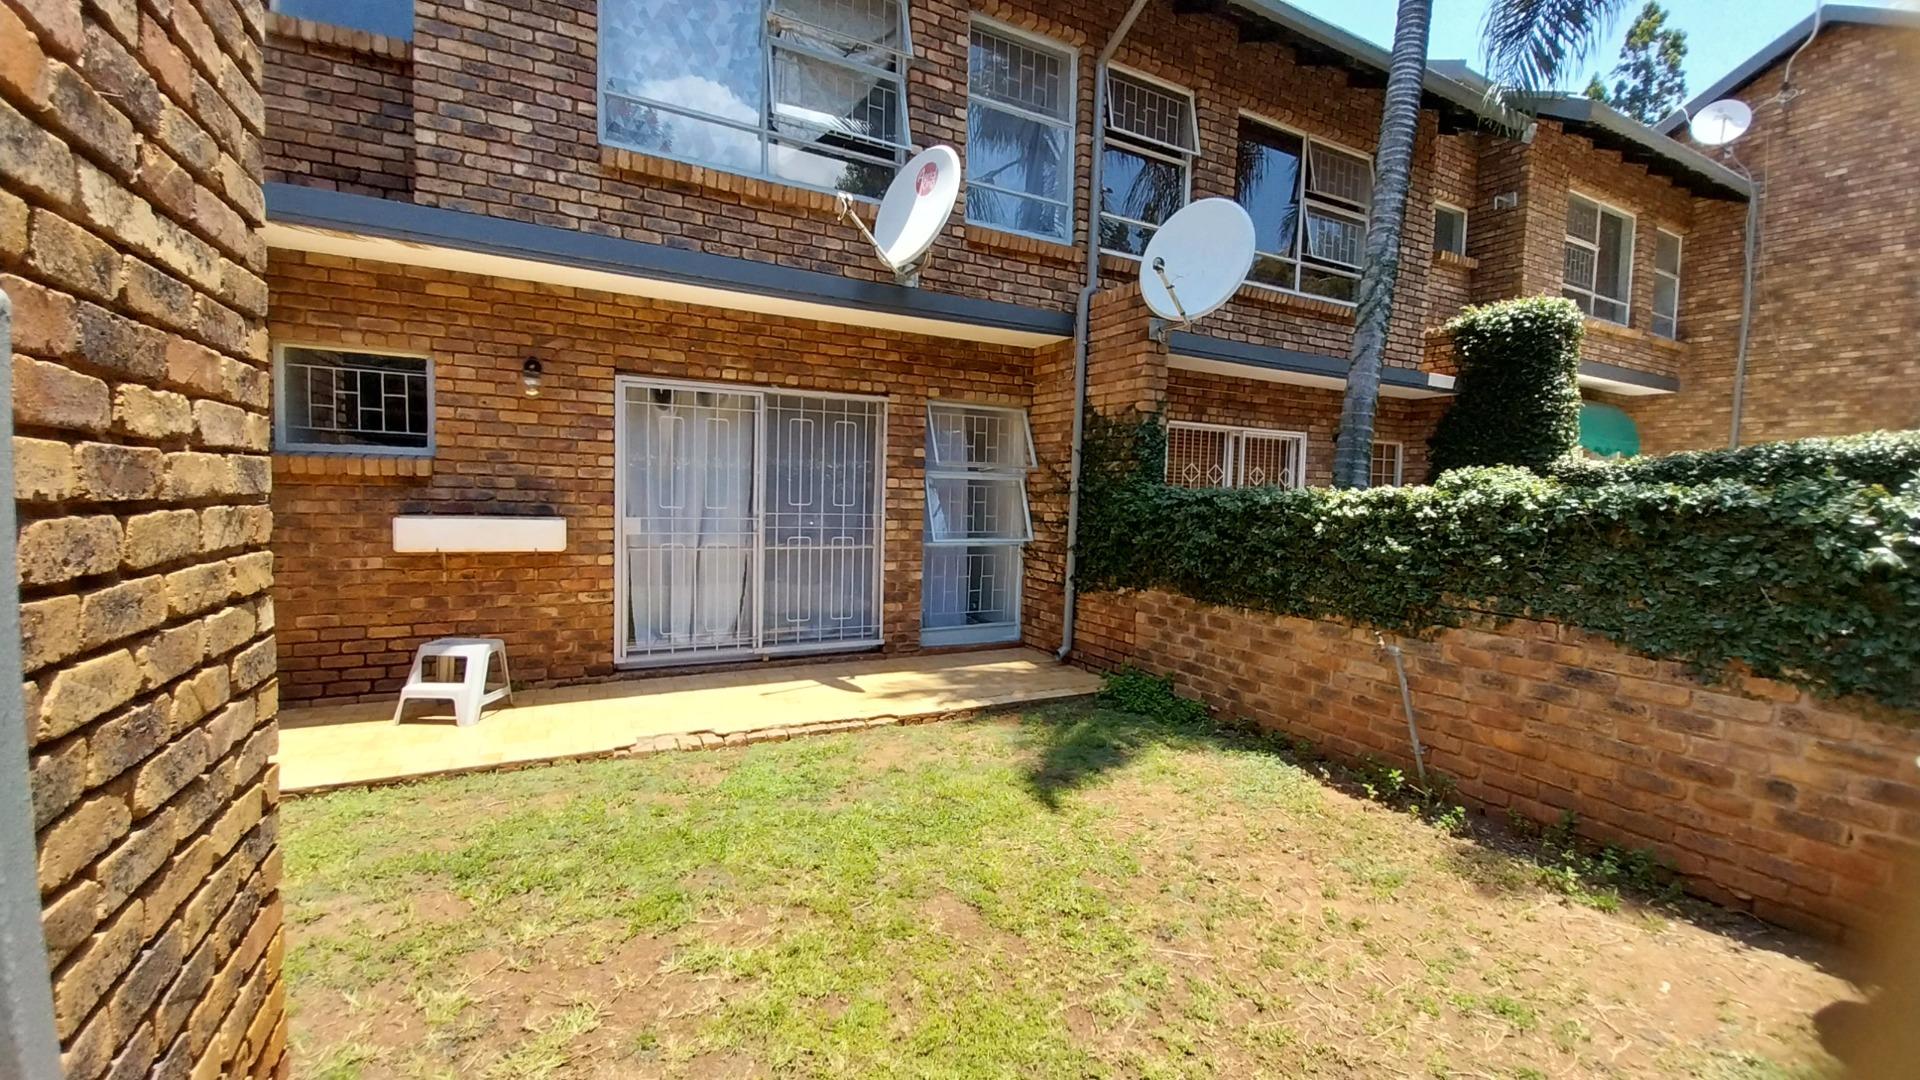 2 Bedroom Apartment / flat for sale in Hatfield